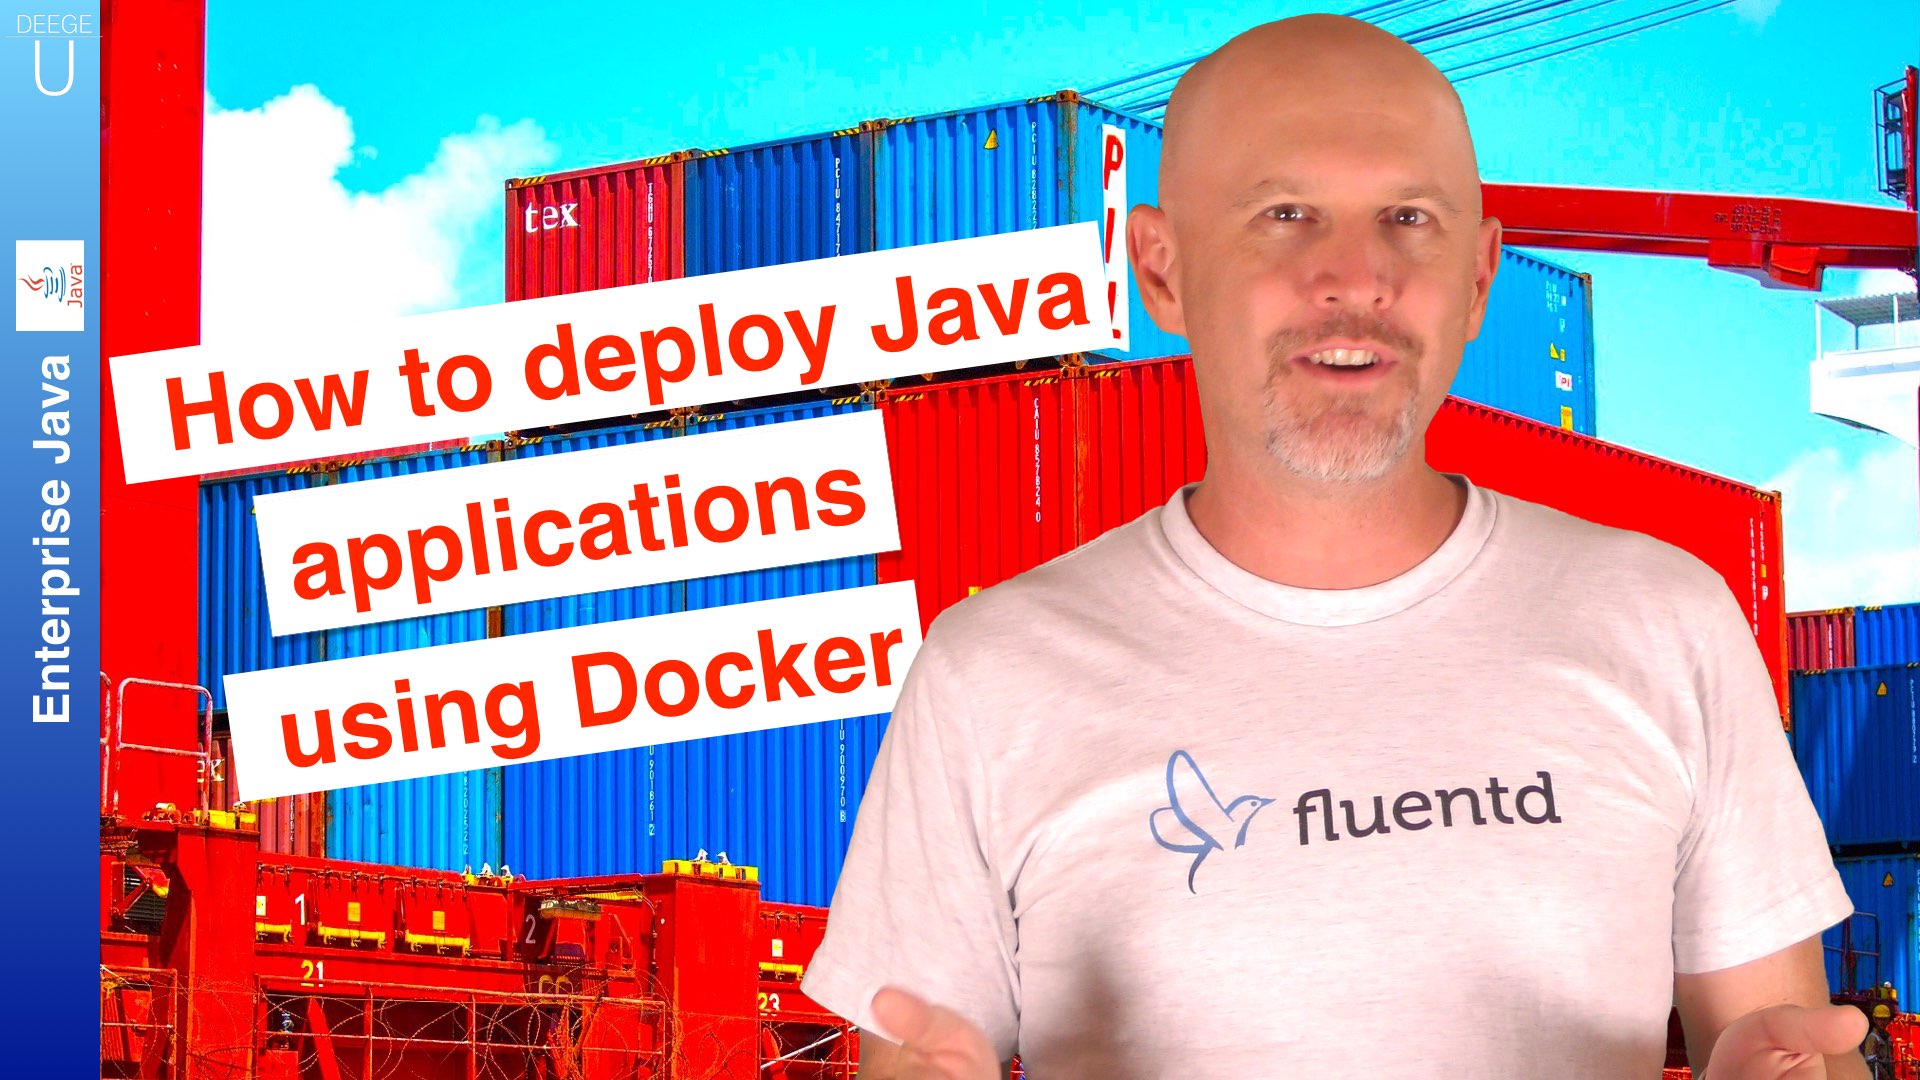 how with package to maven jar applications using Docker  DeegeU  to Java How deploy